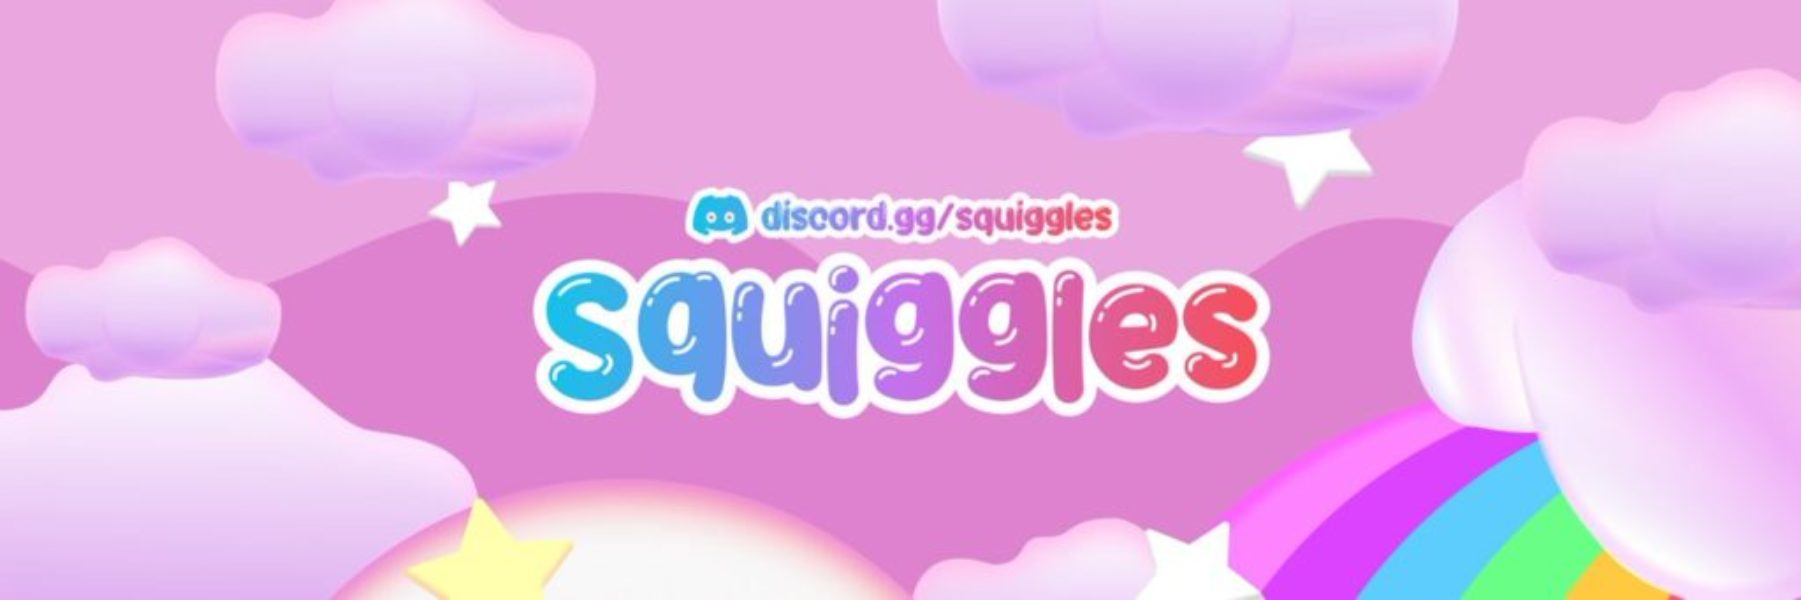 squiggles